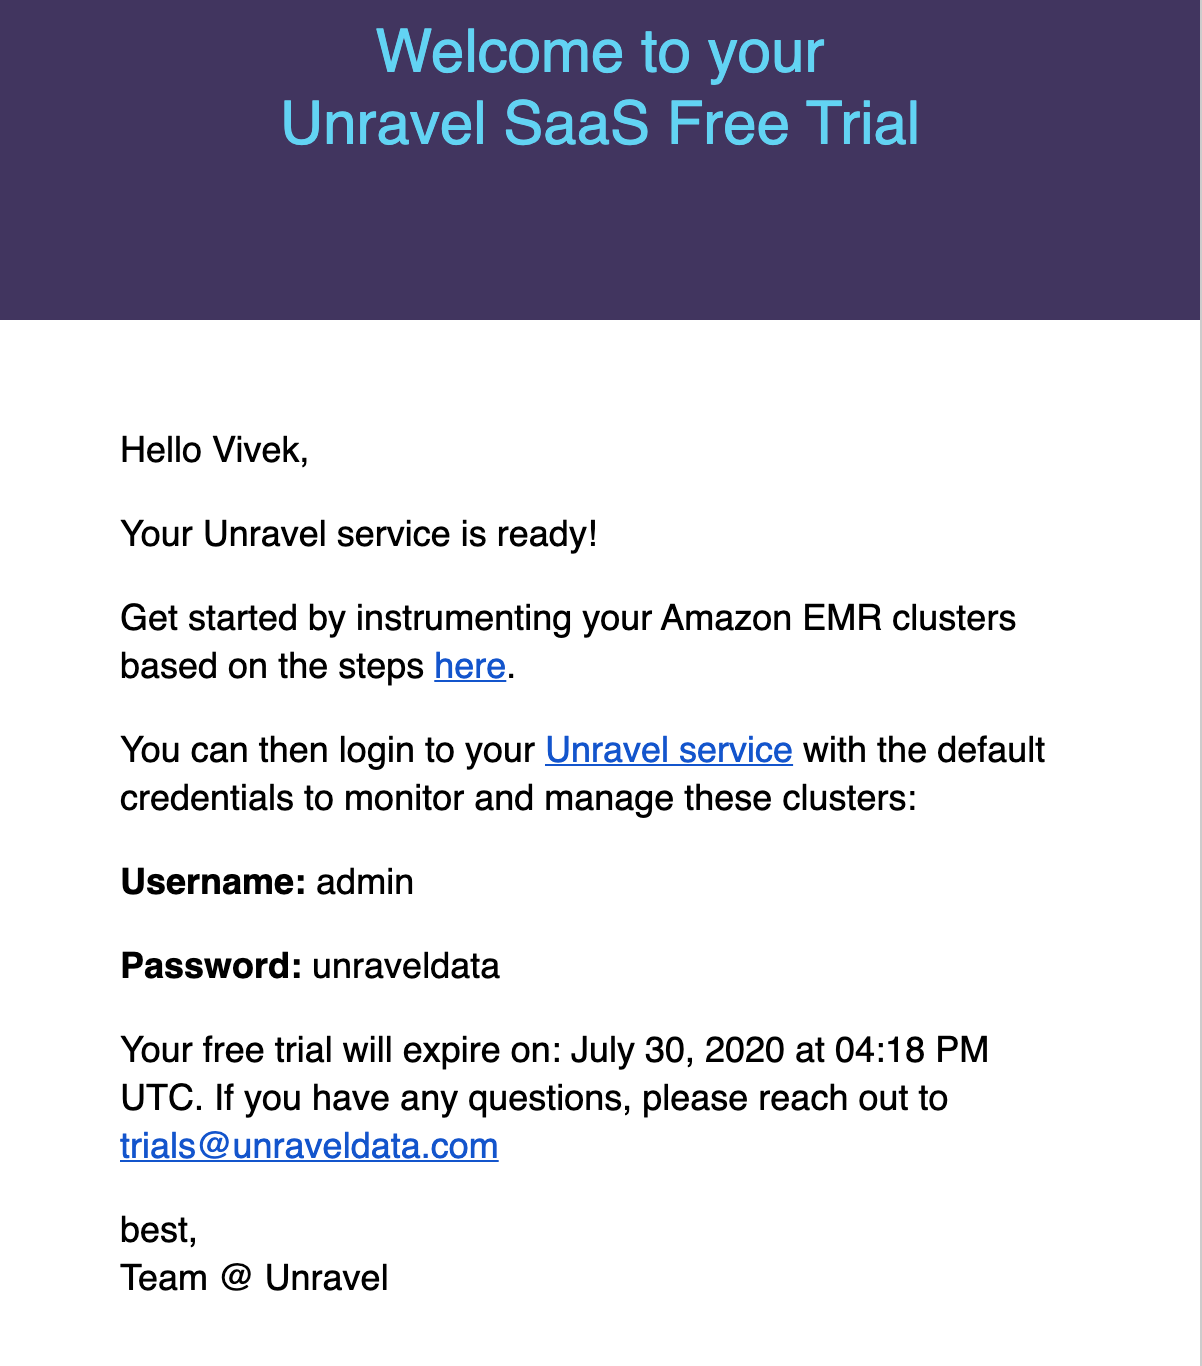 saas-welcome-email-1.png